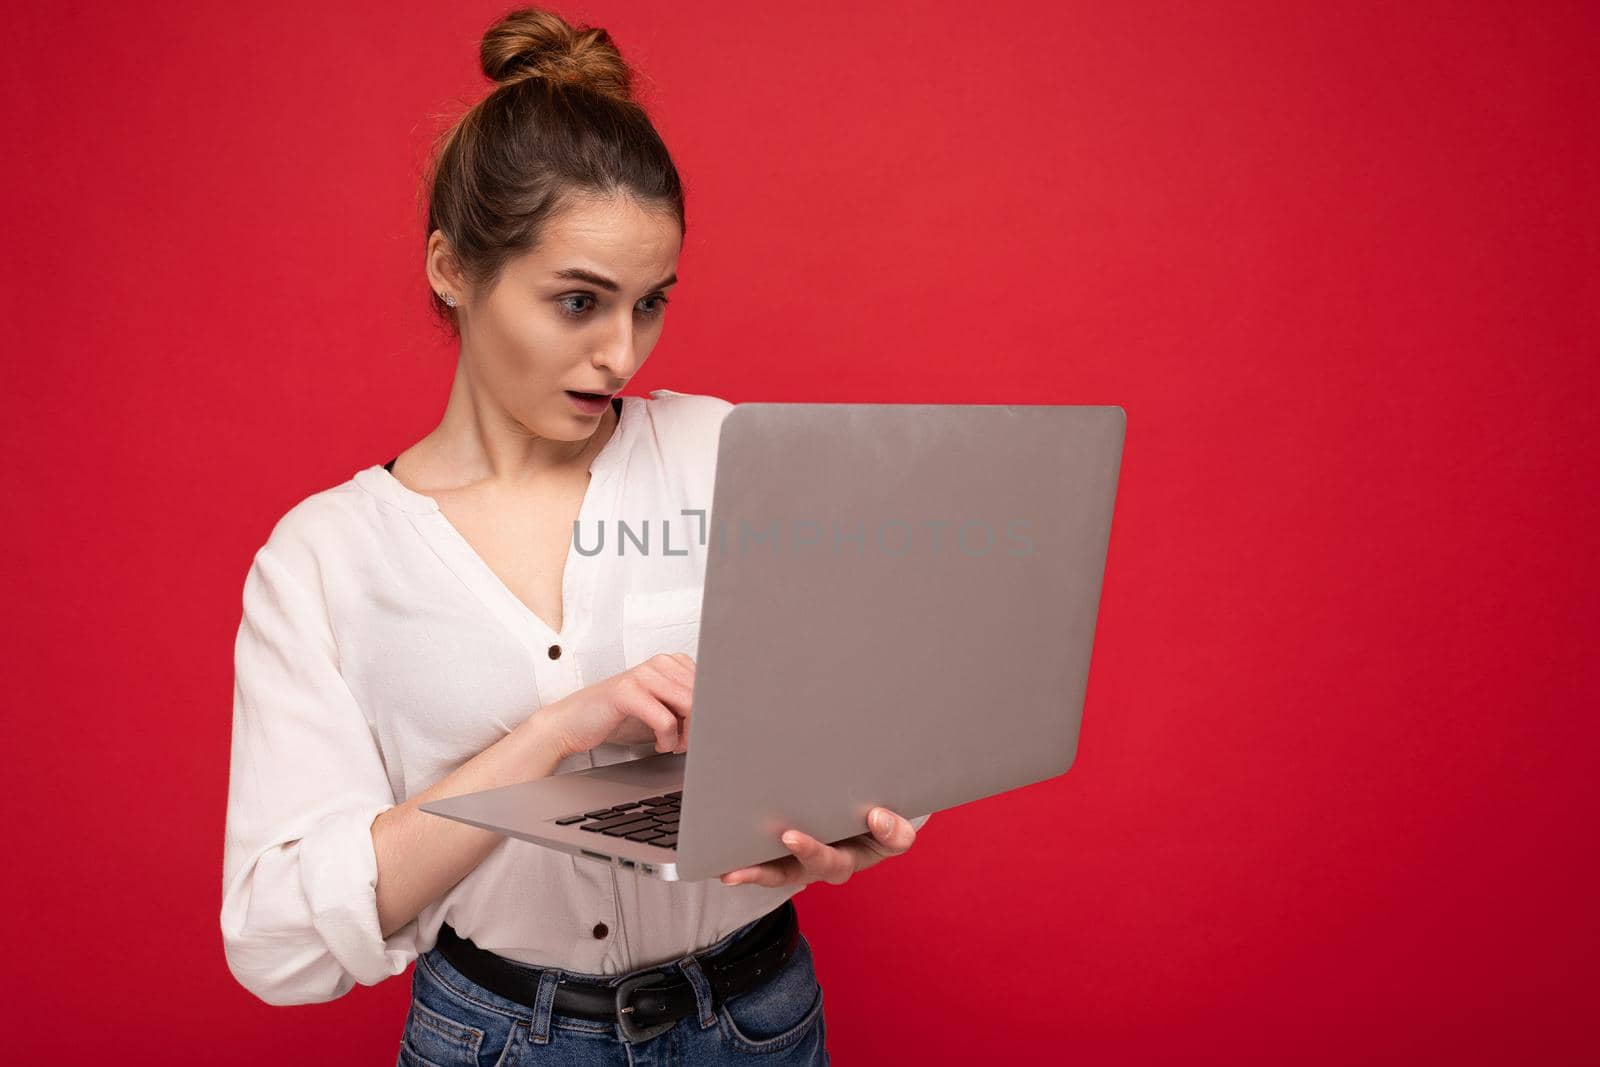 Side profile of Beautiful amazed brunet young woman holding netbook computer looking down with open mouth wearing white shirt typing on keyboard isolated on red background by TRMK